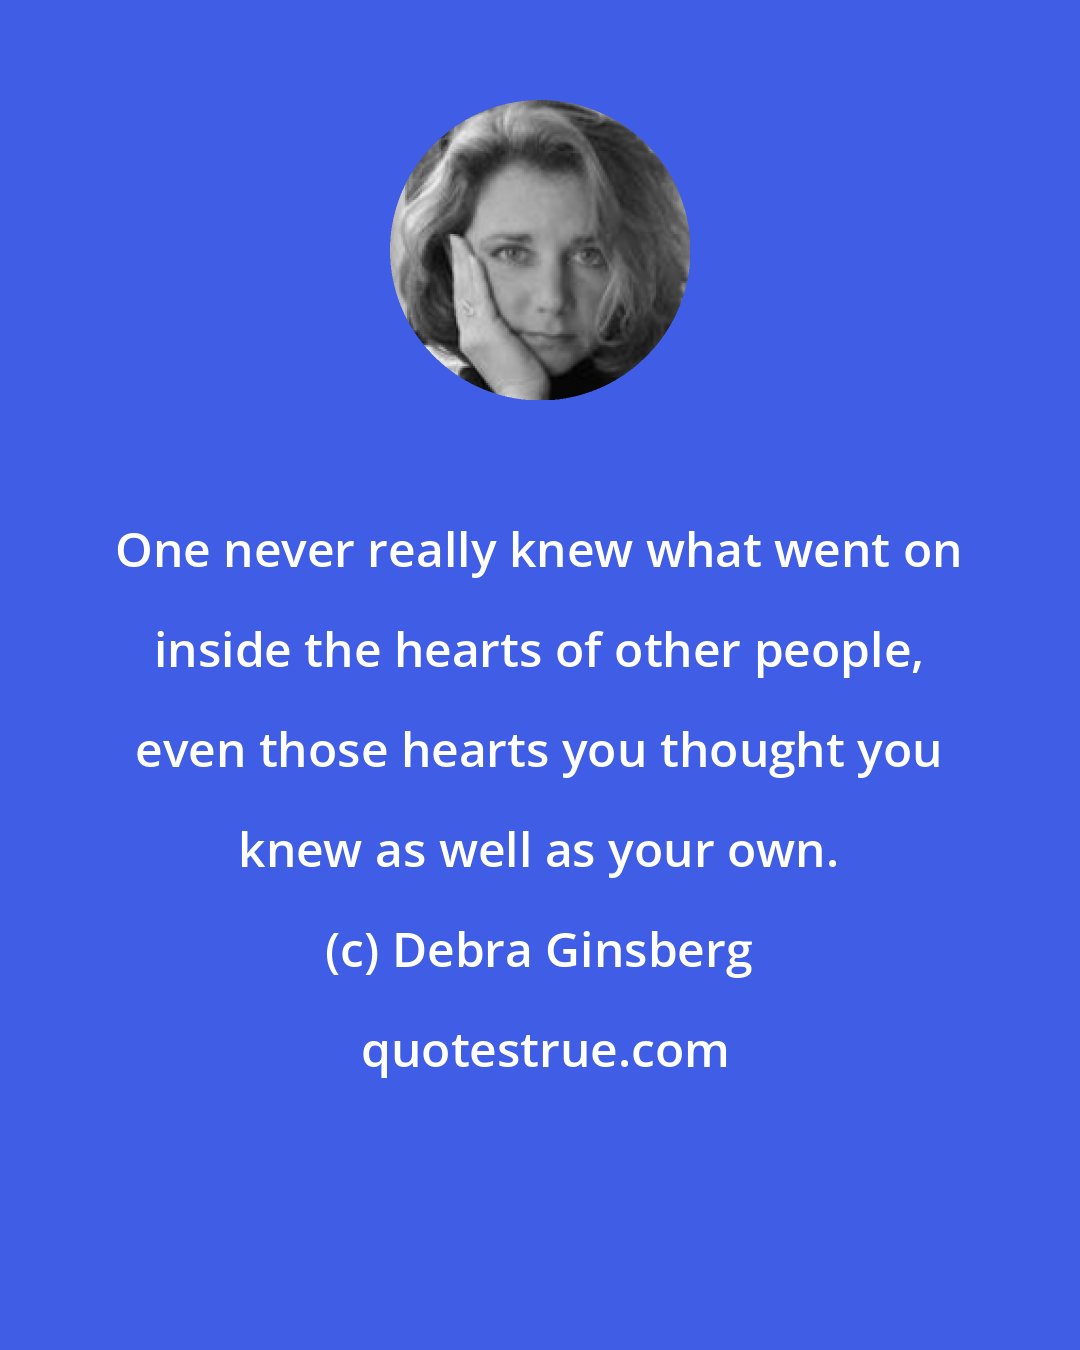 Debra Ginsberg: One never really knew what went on inside the hearts of other people, even those hearts you thought you knew as well as your own.